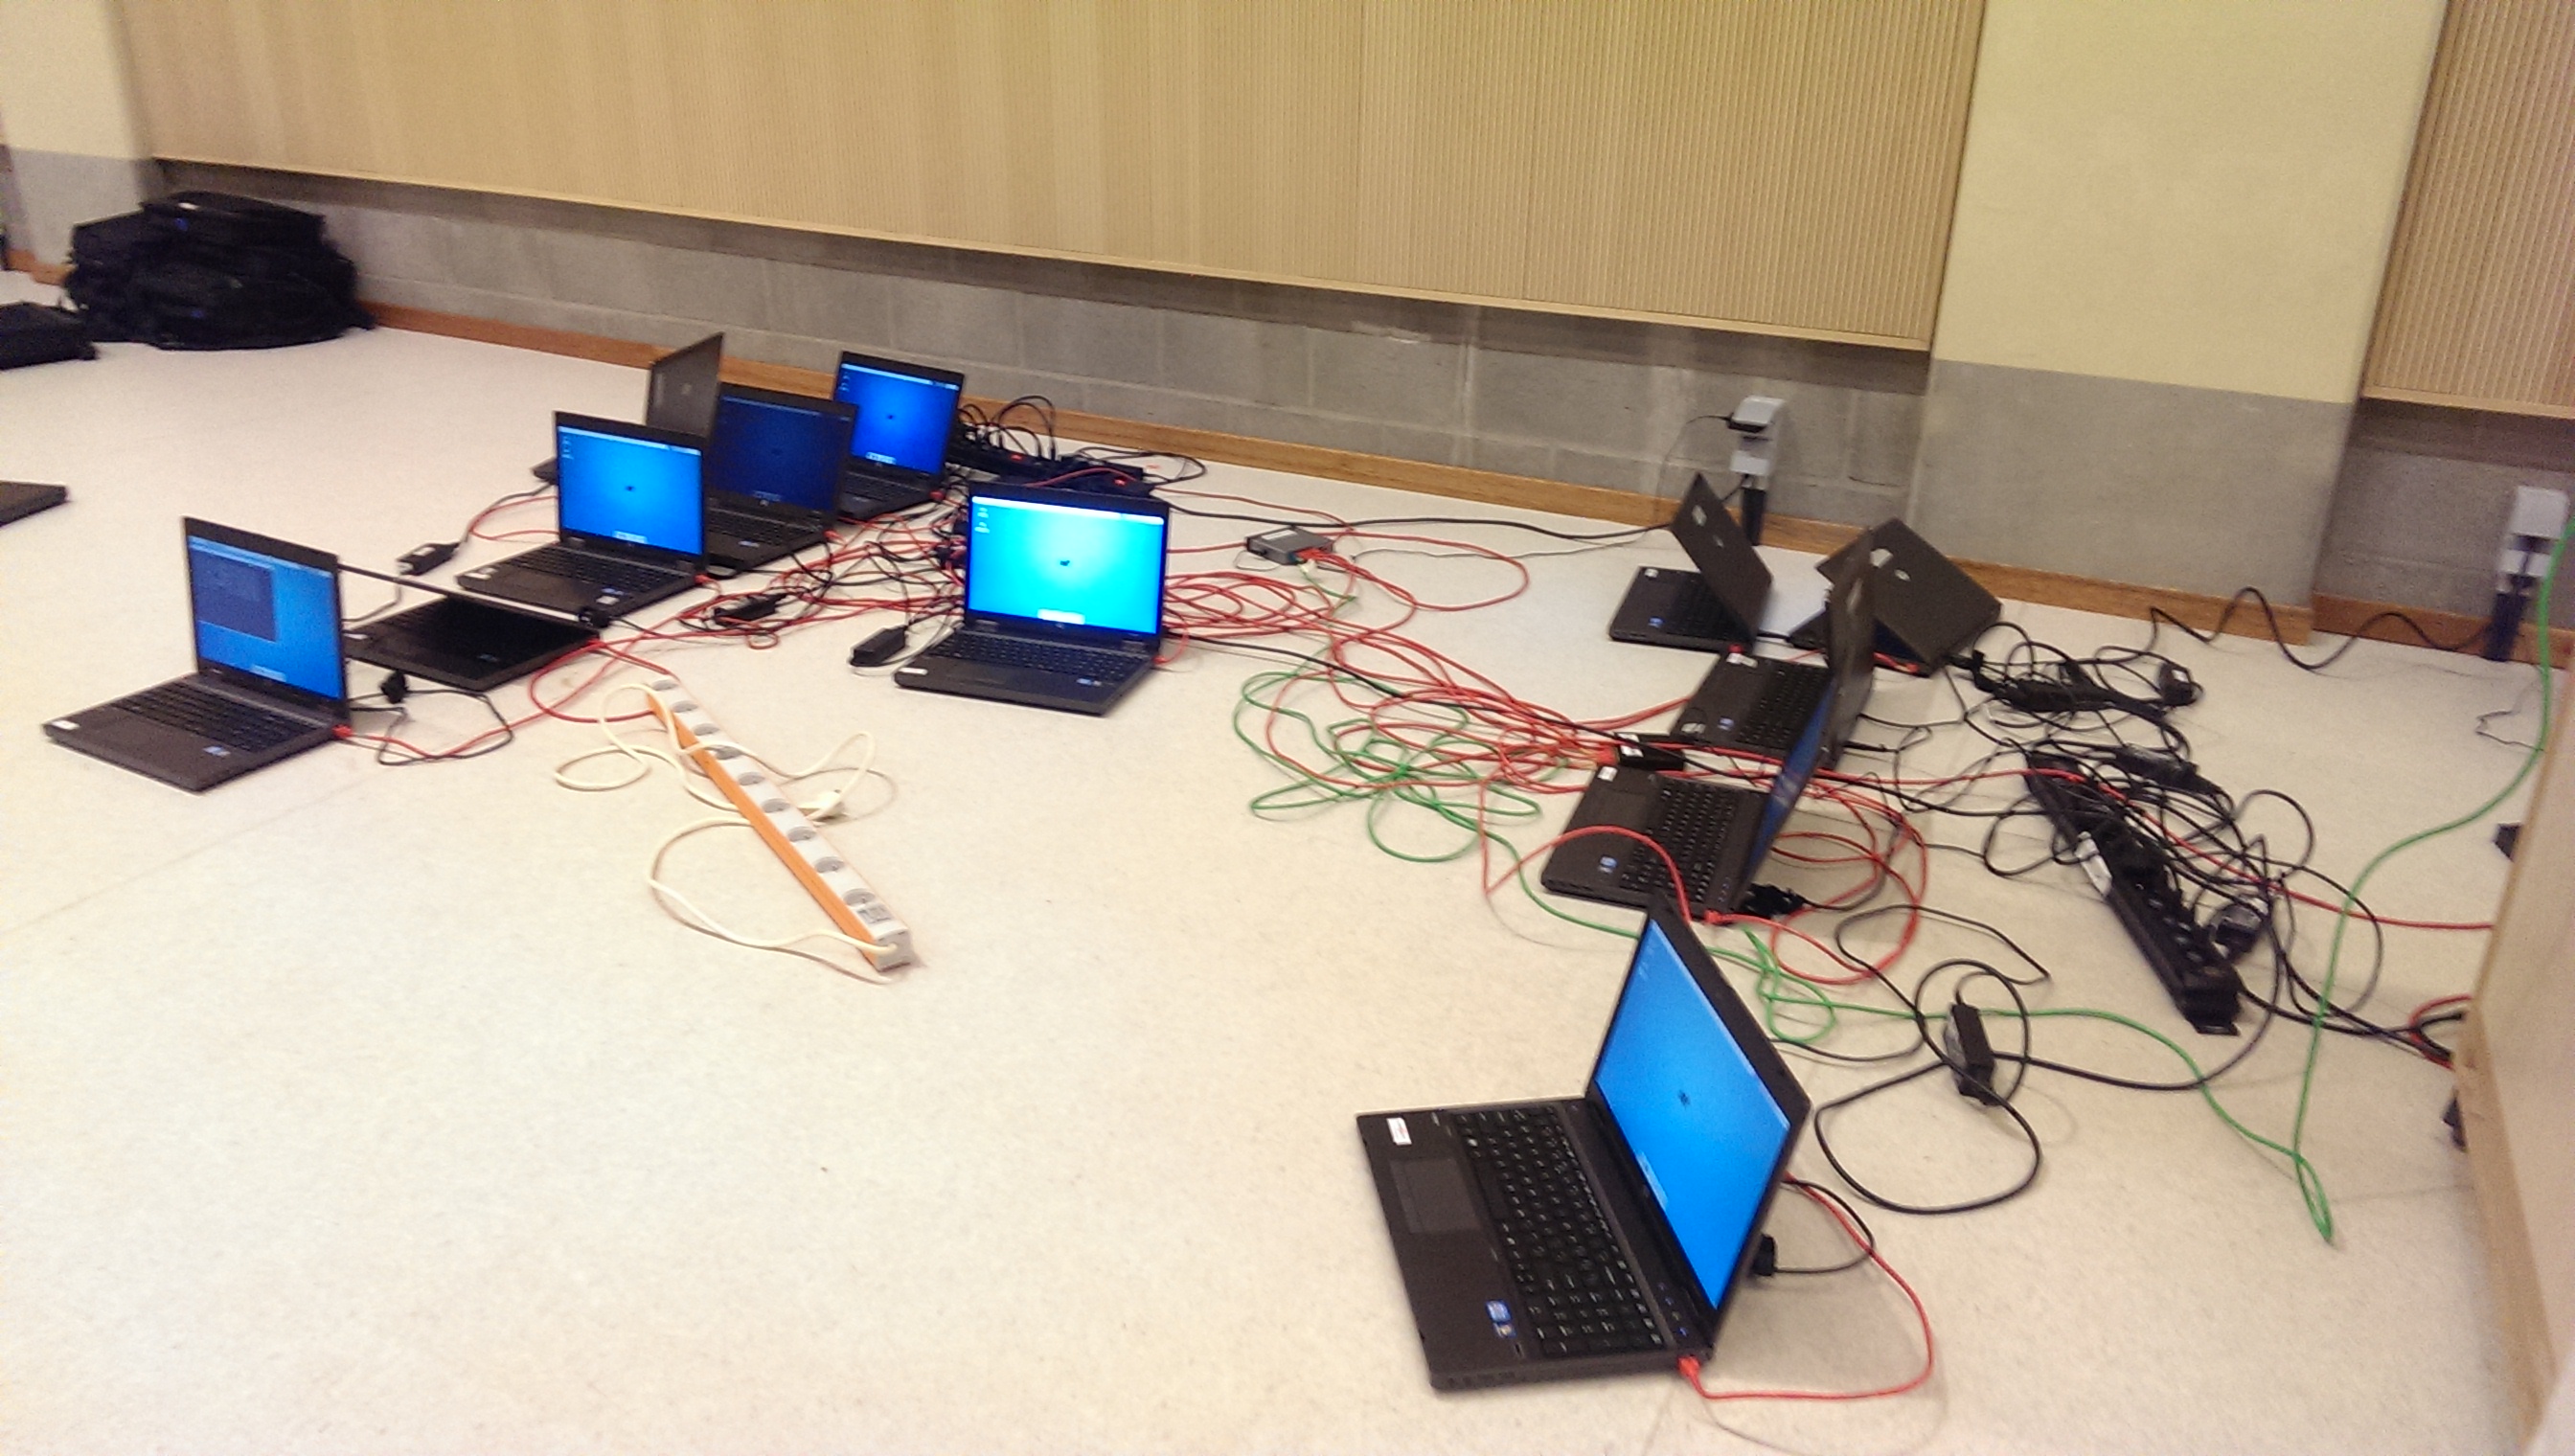 12 laptops next to eachother wired into a single router.